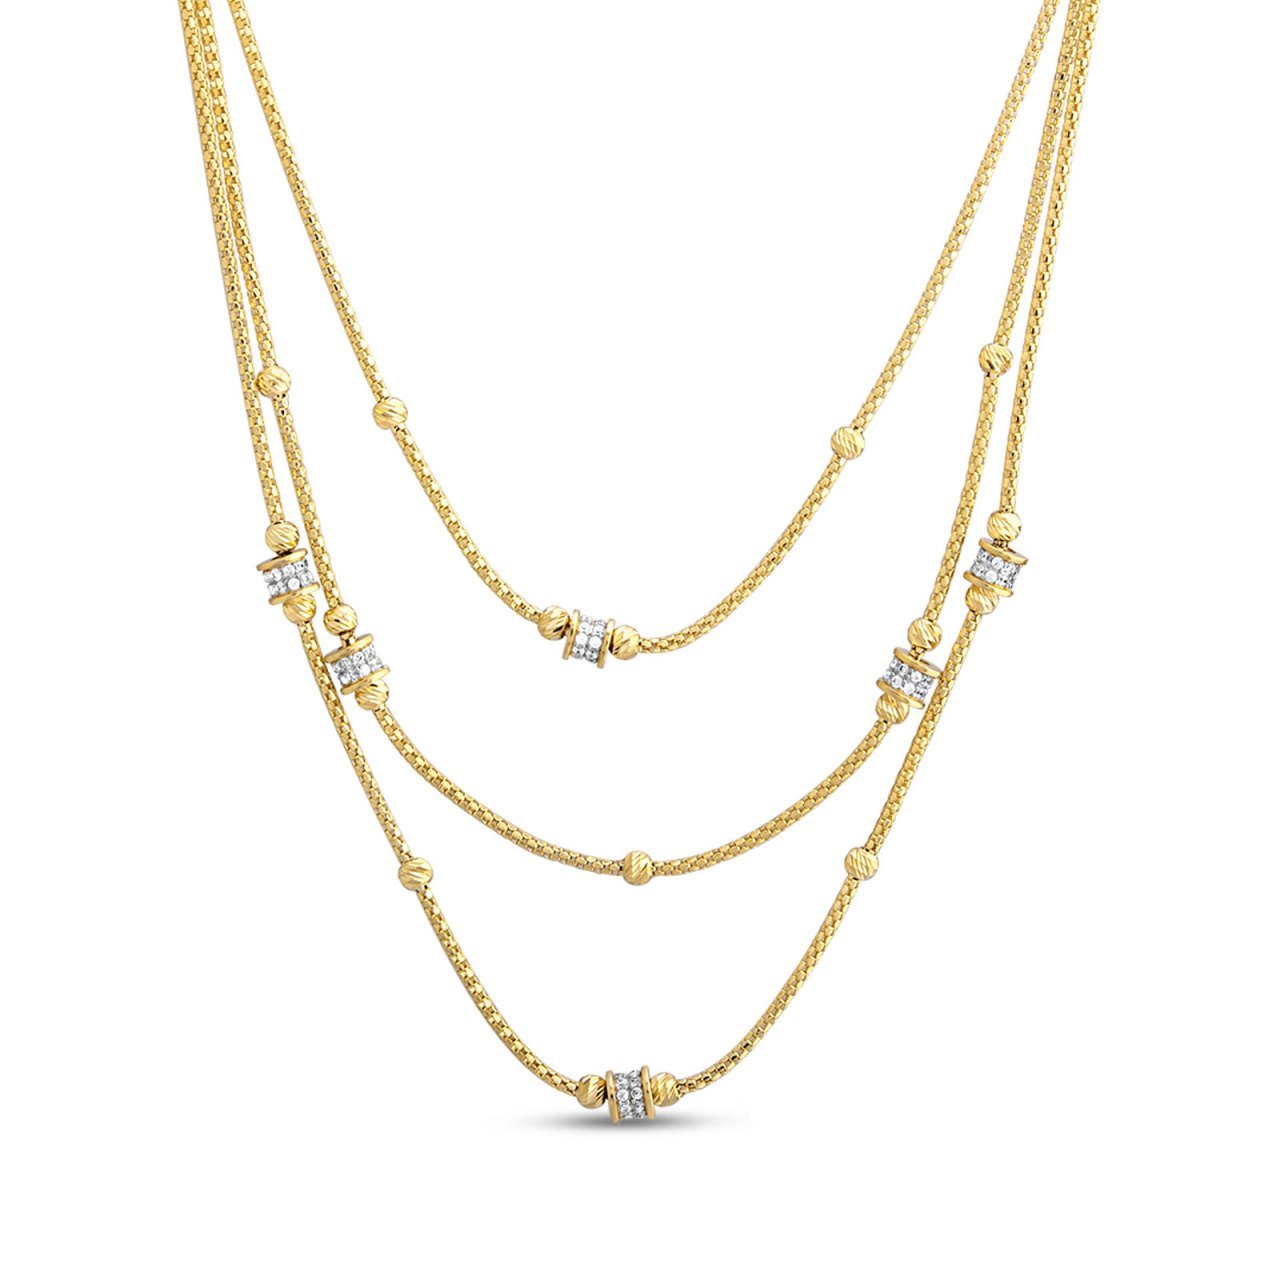 TSM 2367 is 12,20G Gold Necklace